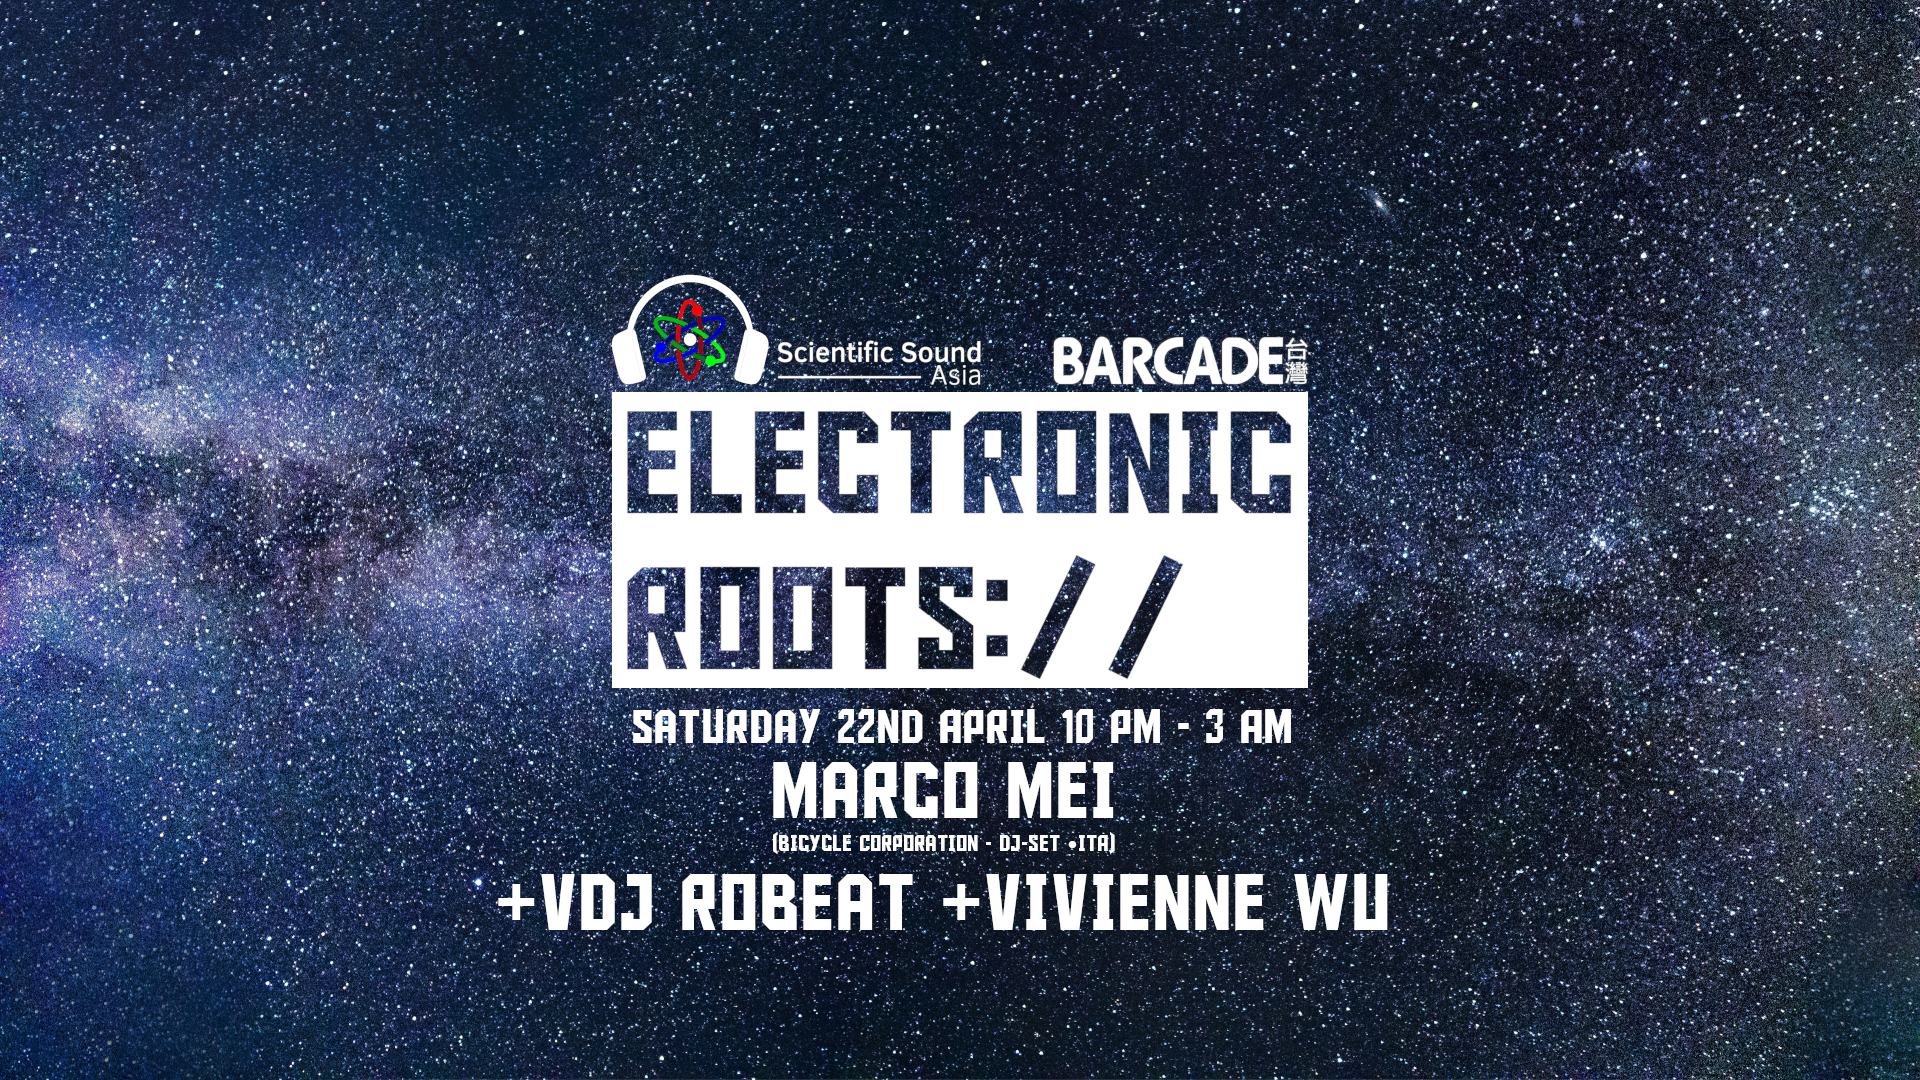 Scientific Sound Asia X Barcade Taiwan ~ Electronic Roots (Free Entry) - Página frontal